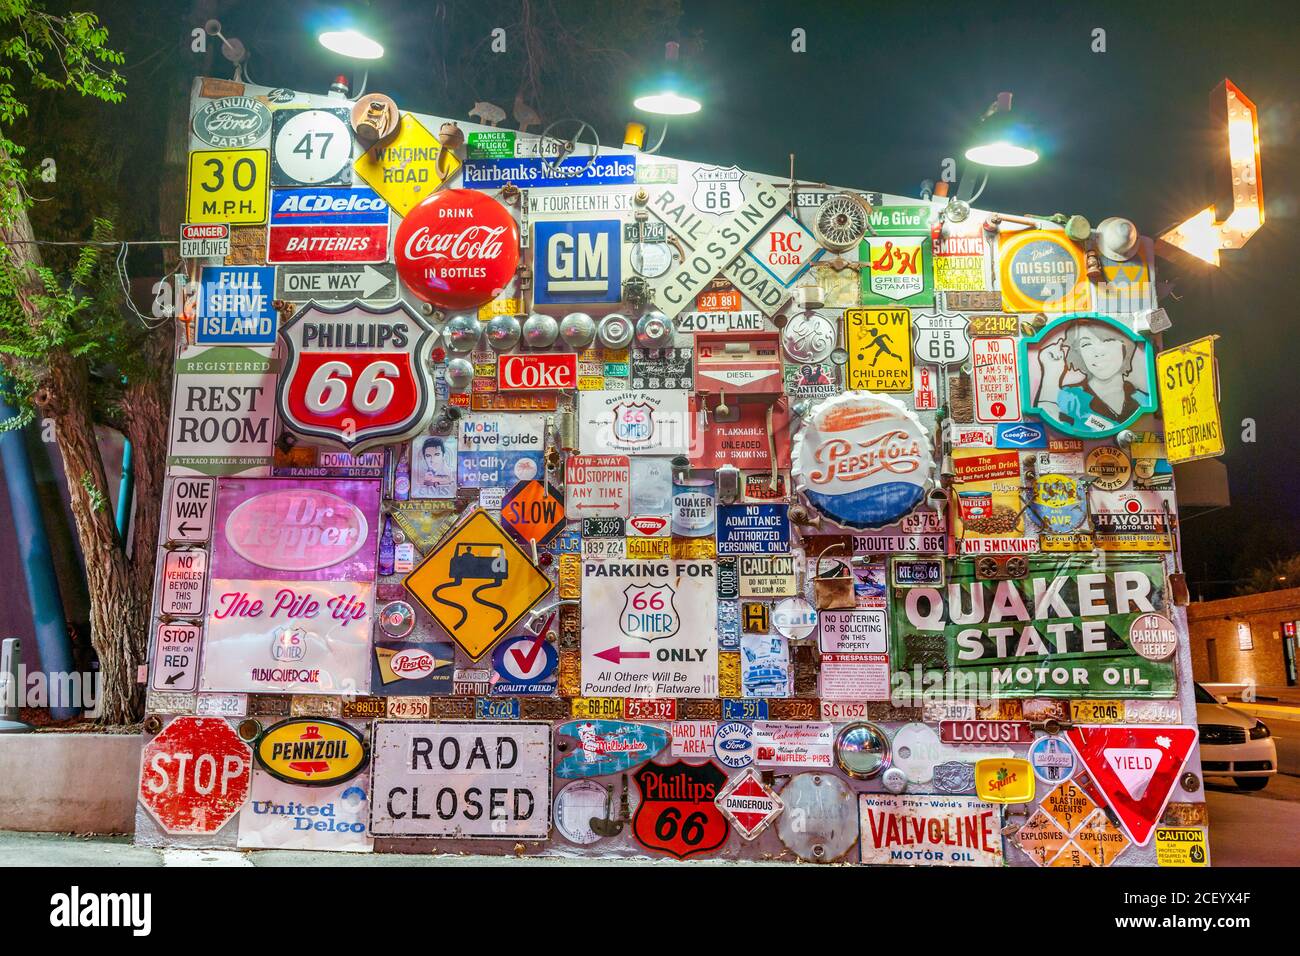 Albuquerque, New Mexico, USA. - September 19 2015; Wall of old signs and famous brands outside fr4om era of Historic Route 66, Albuquerque, New Mexico Stock Photo